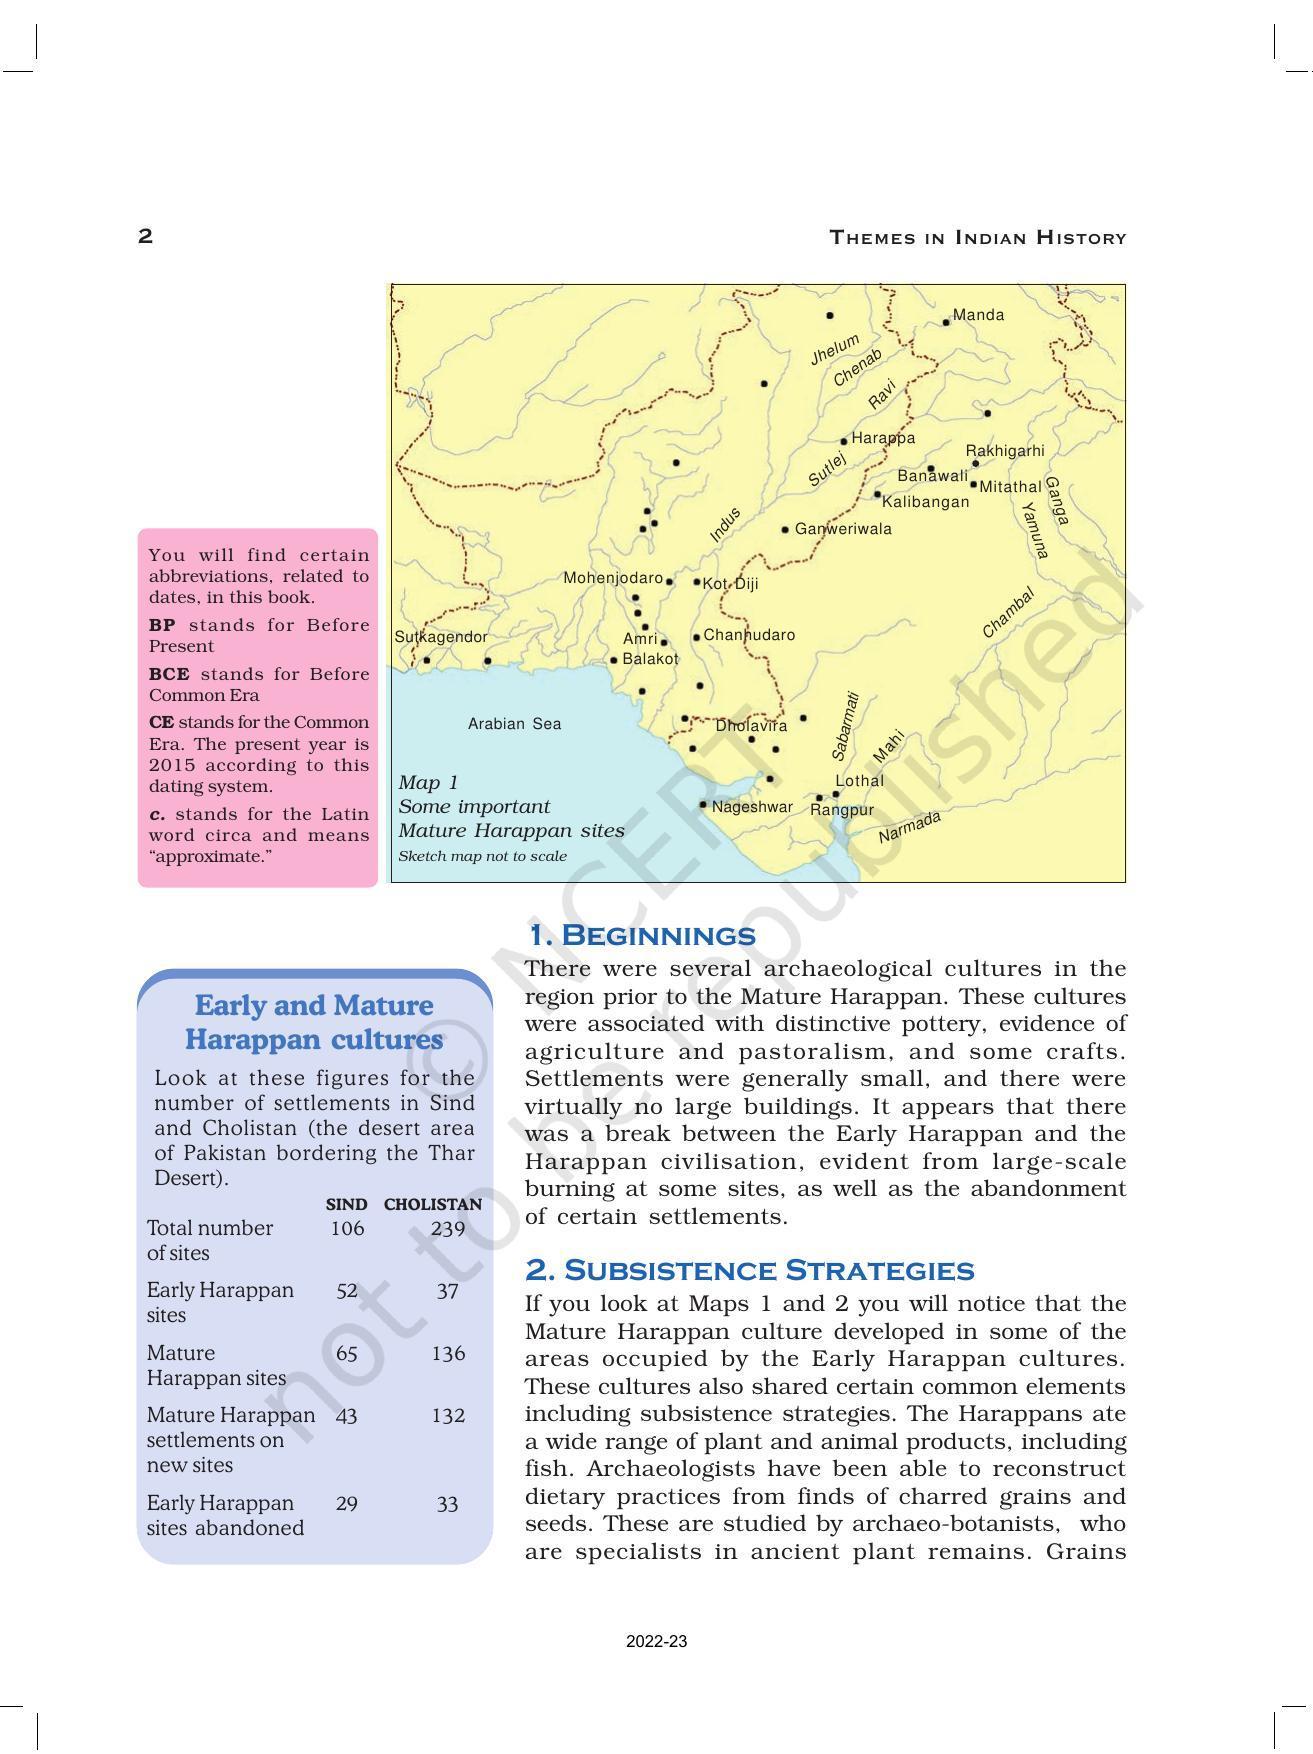 NCERT Book for Class 12 History (Part-1) Chapter 1 Bricks, Beads, and Bones - Page 2